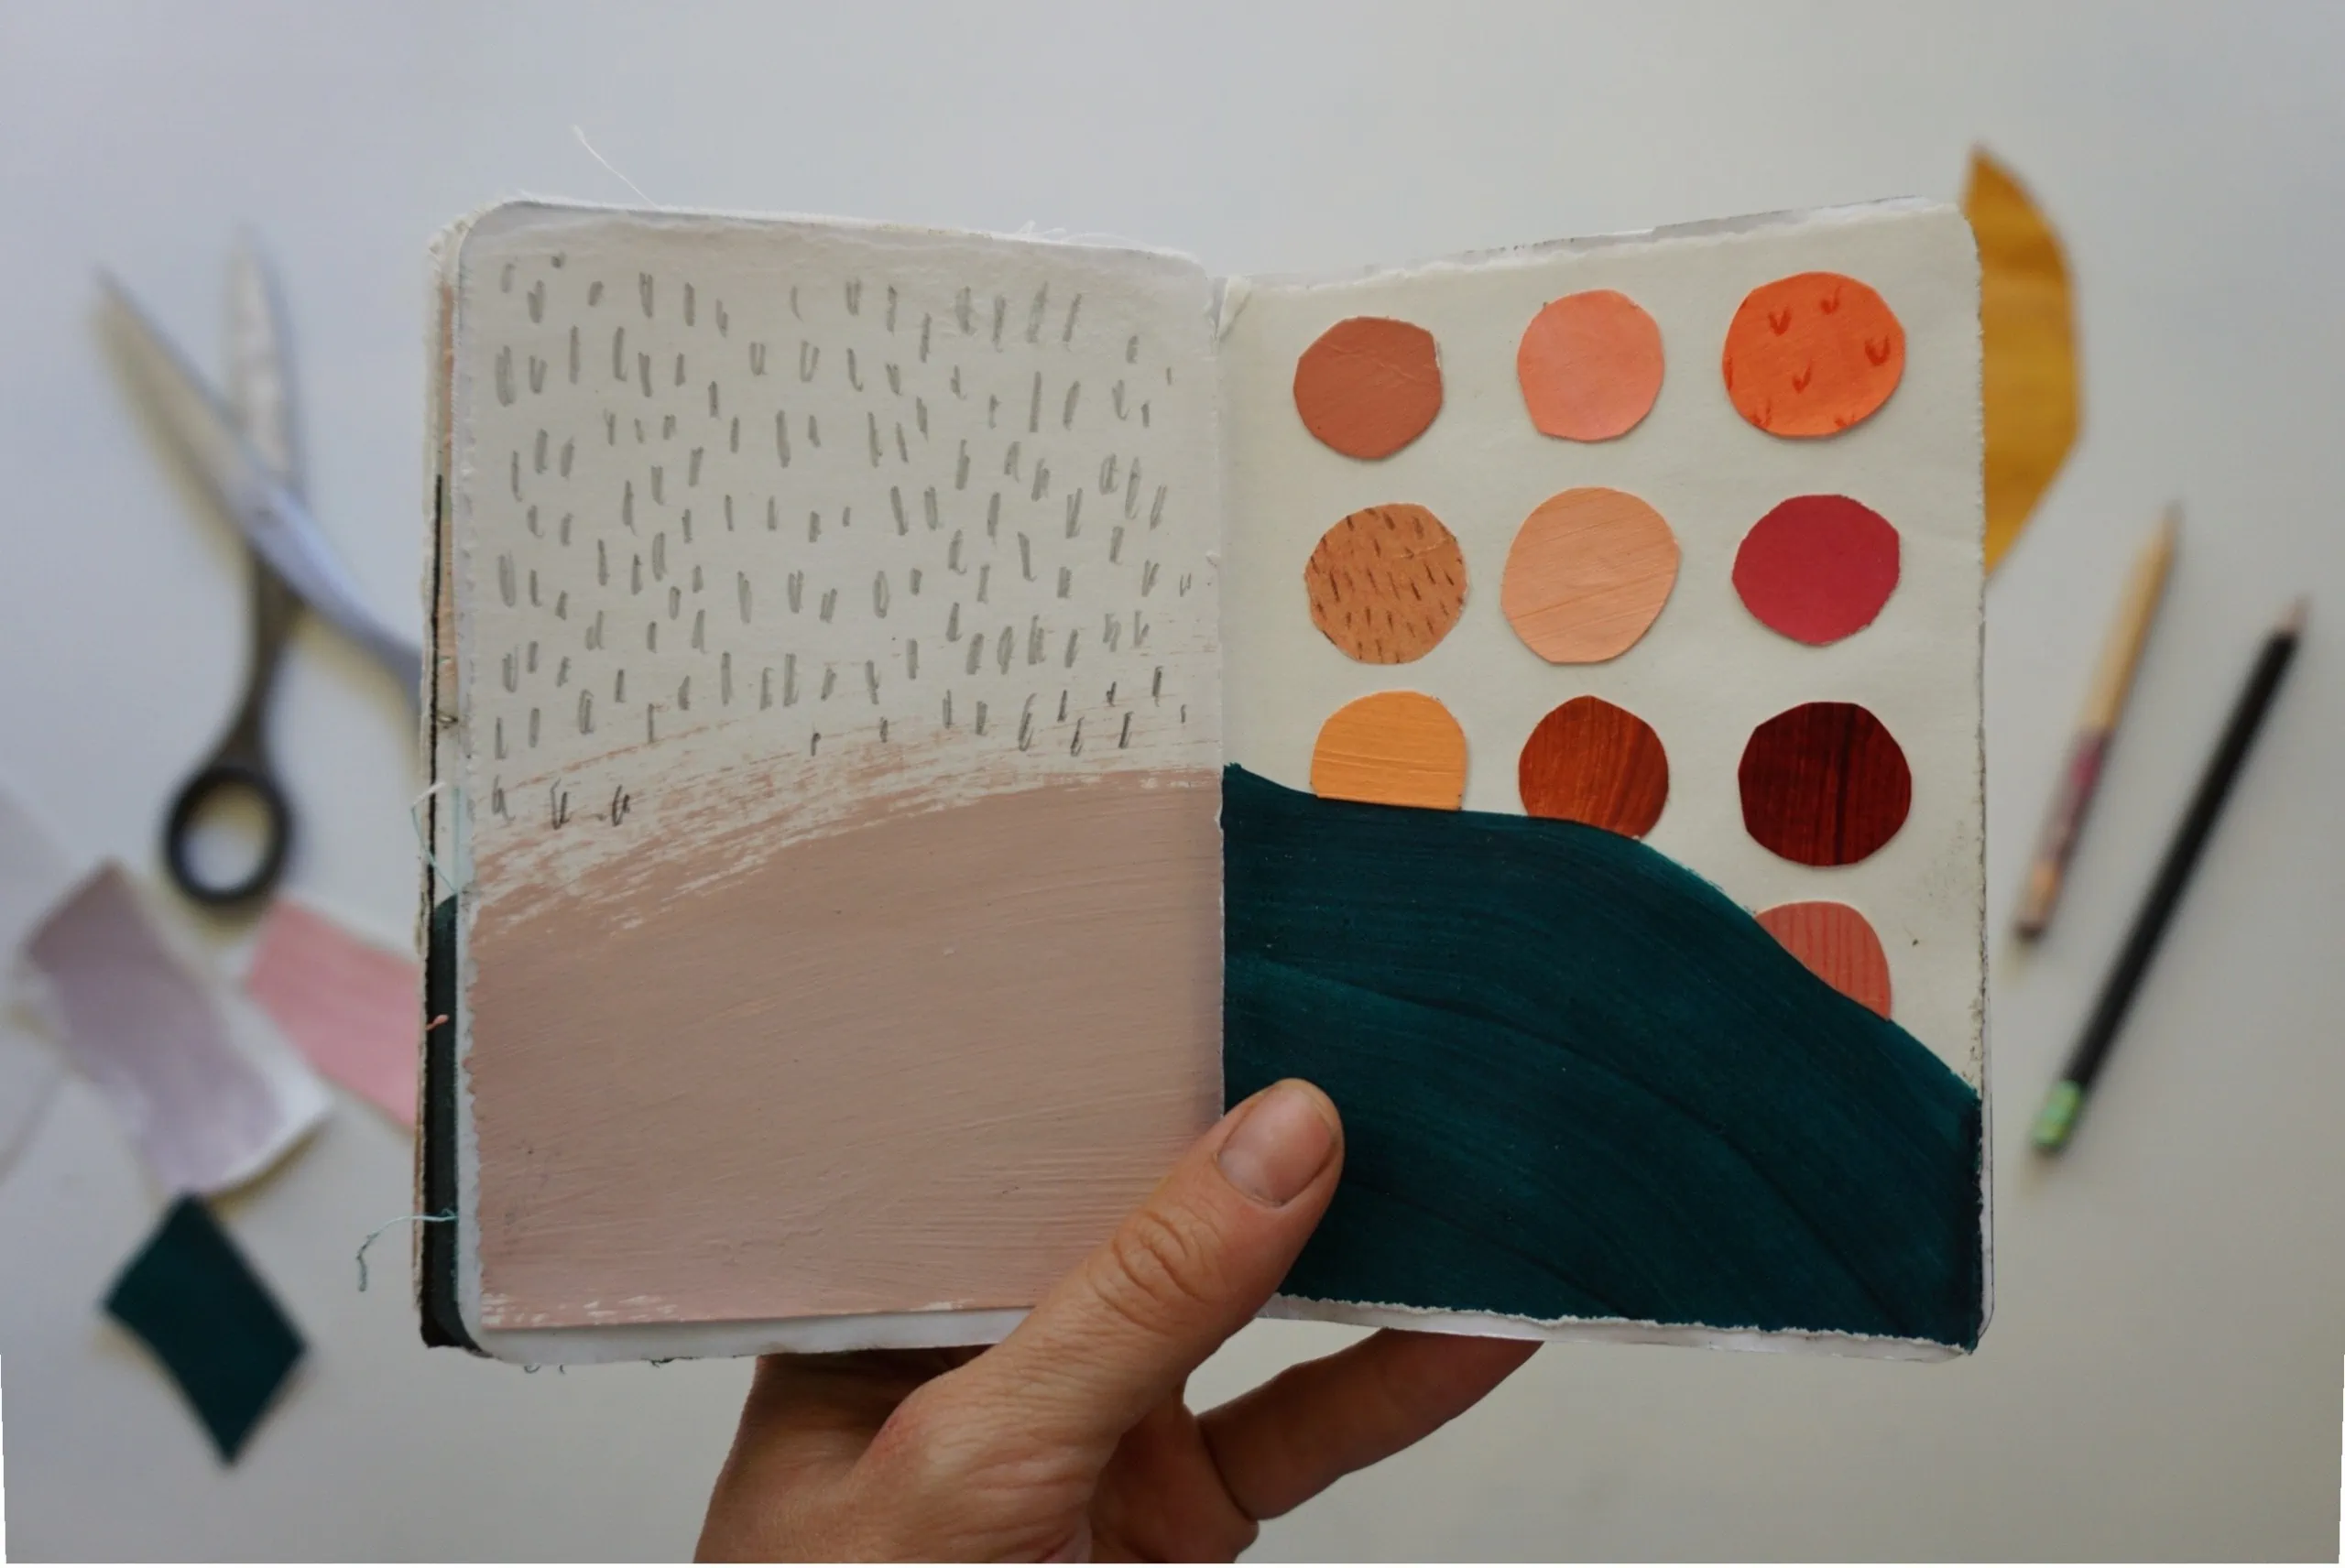 Rachel shows an open view of her sketchbook with painted and collaged shapes, as well as pencil-drawn marks.